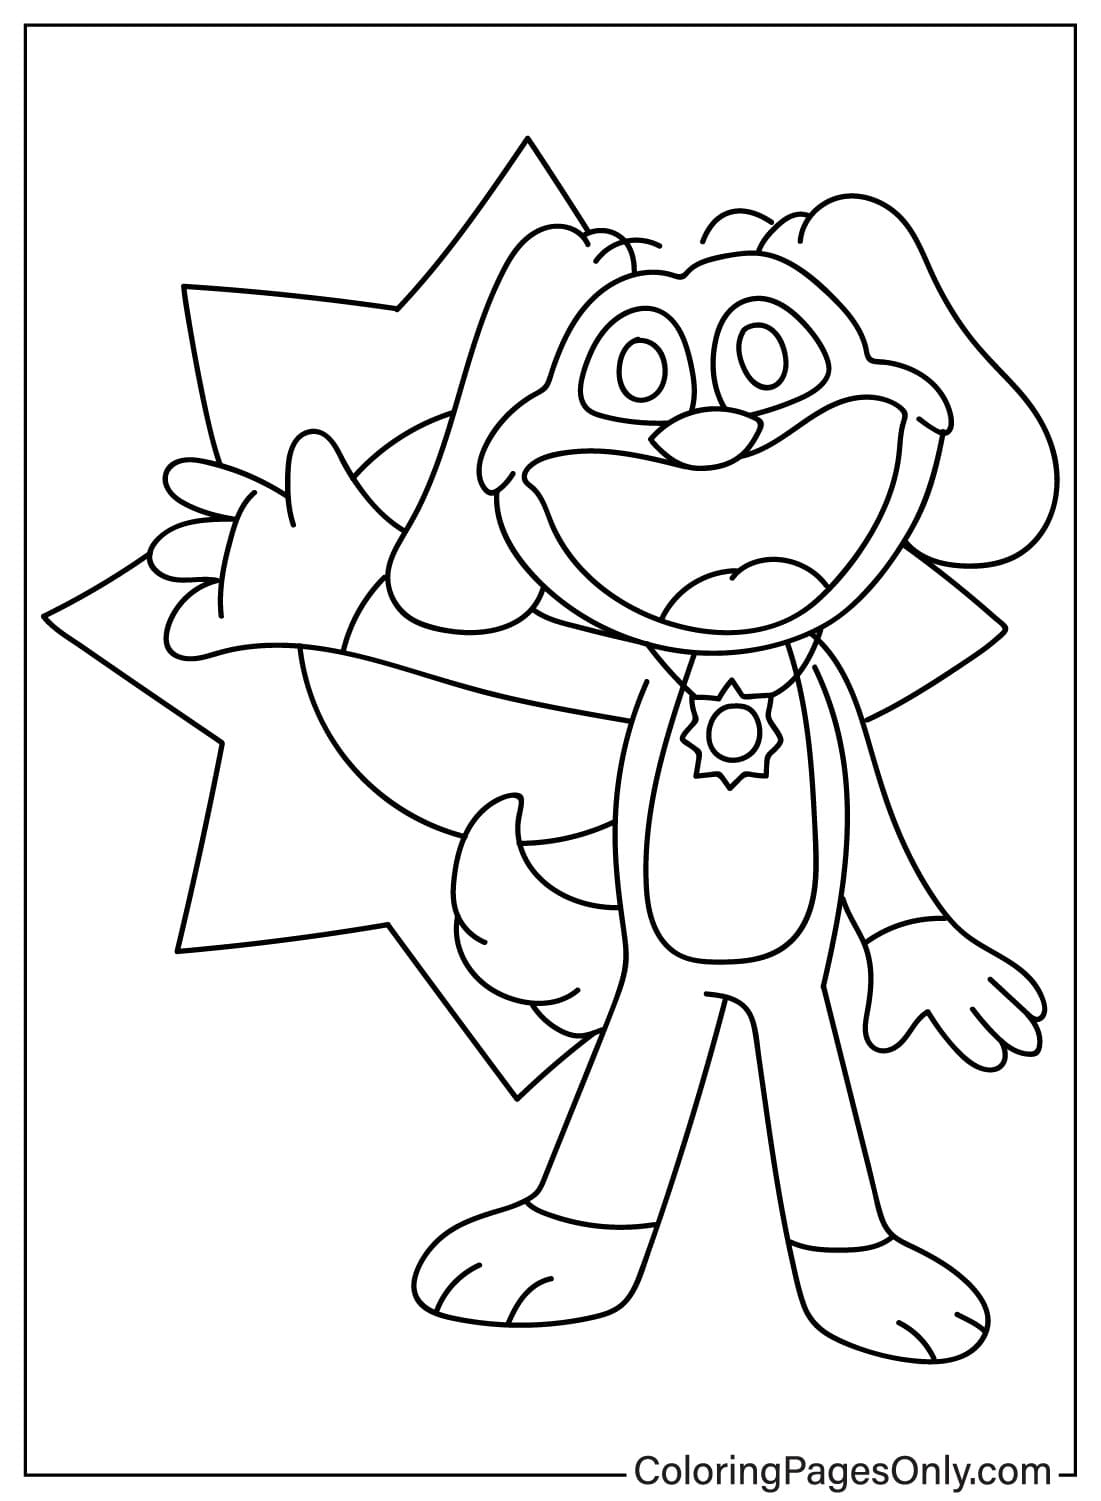 DogDay Coloring Page from DogDay